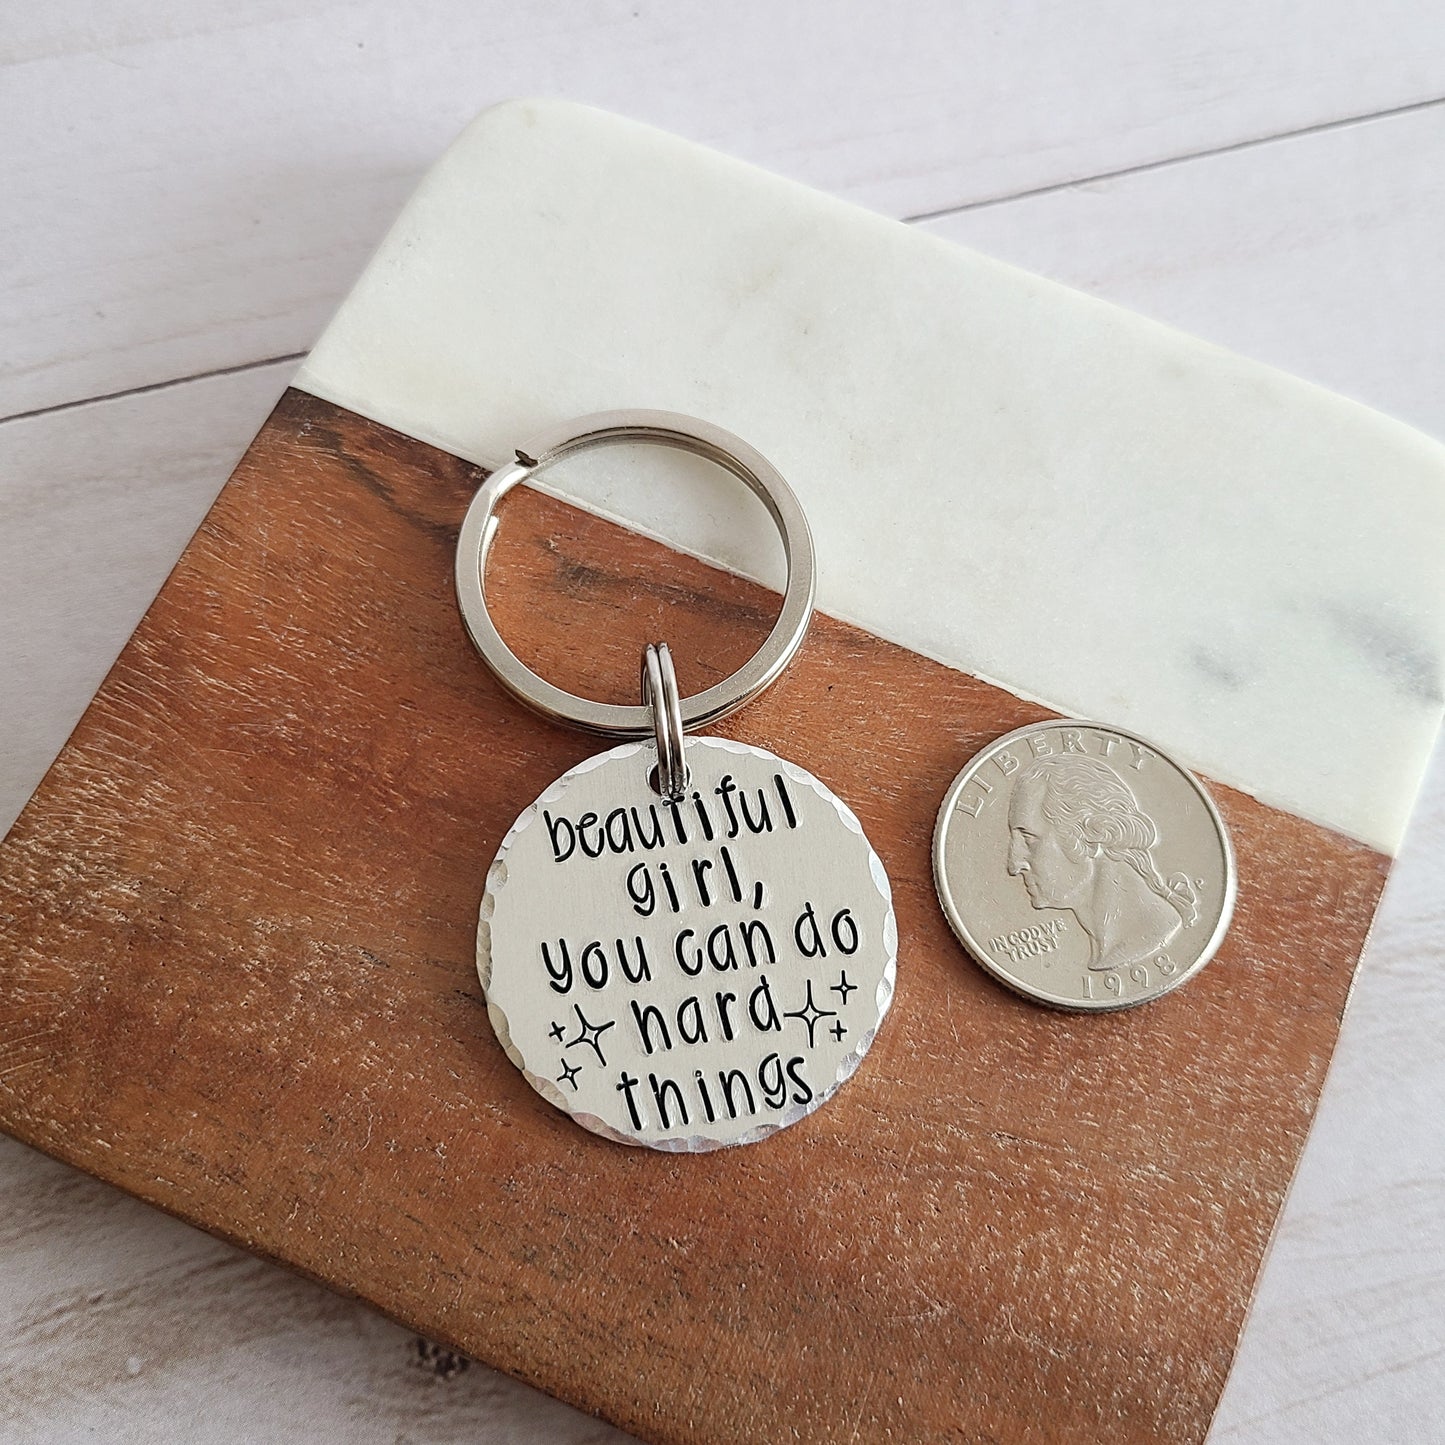 Beautiful Girl You Can Do Hard Things Personalized Keychain, Custom Key Chain Gifts for Teenage Girls, Empowering Women Gift, Graduation Gifts for Her